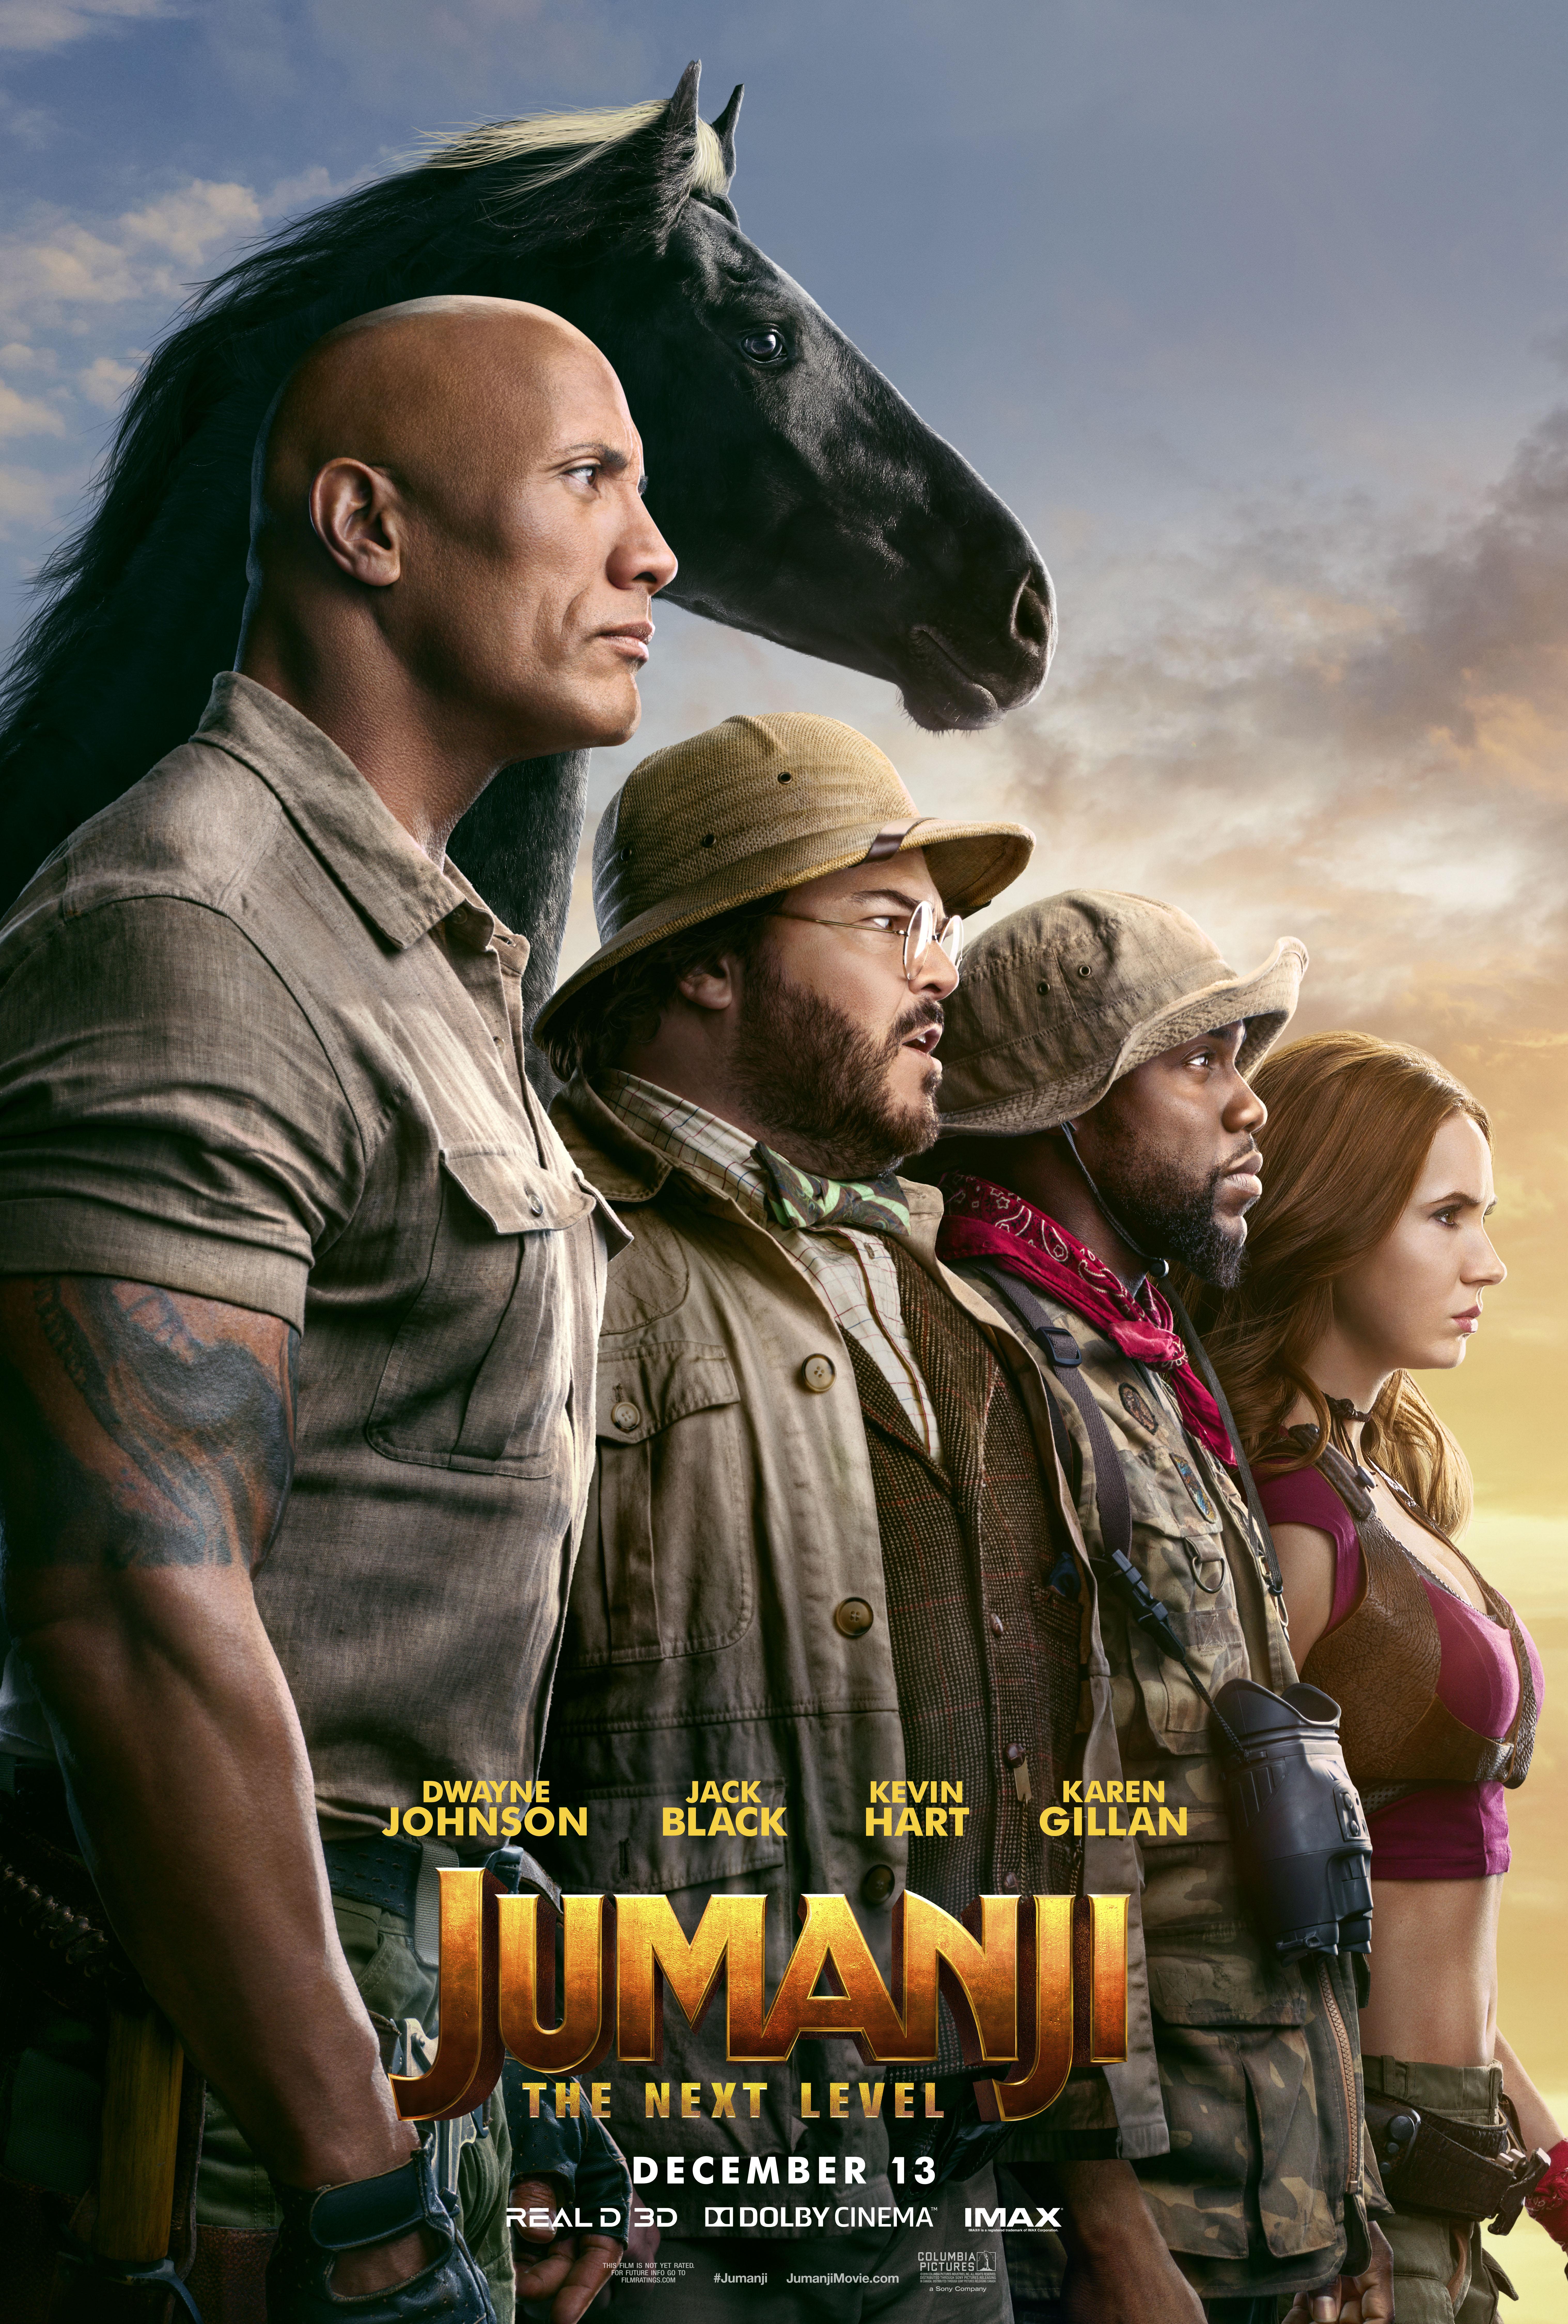 download the new for windows Jumanji: The Next Level